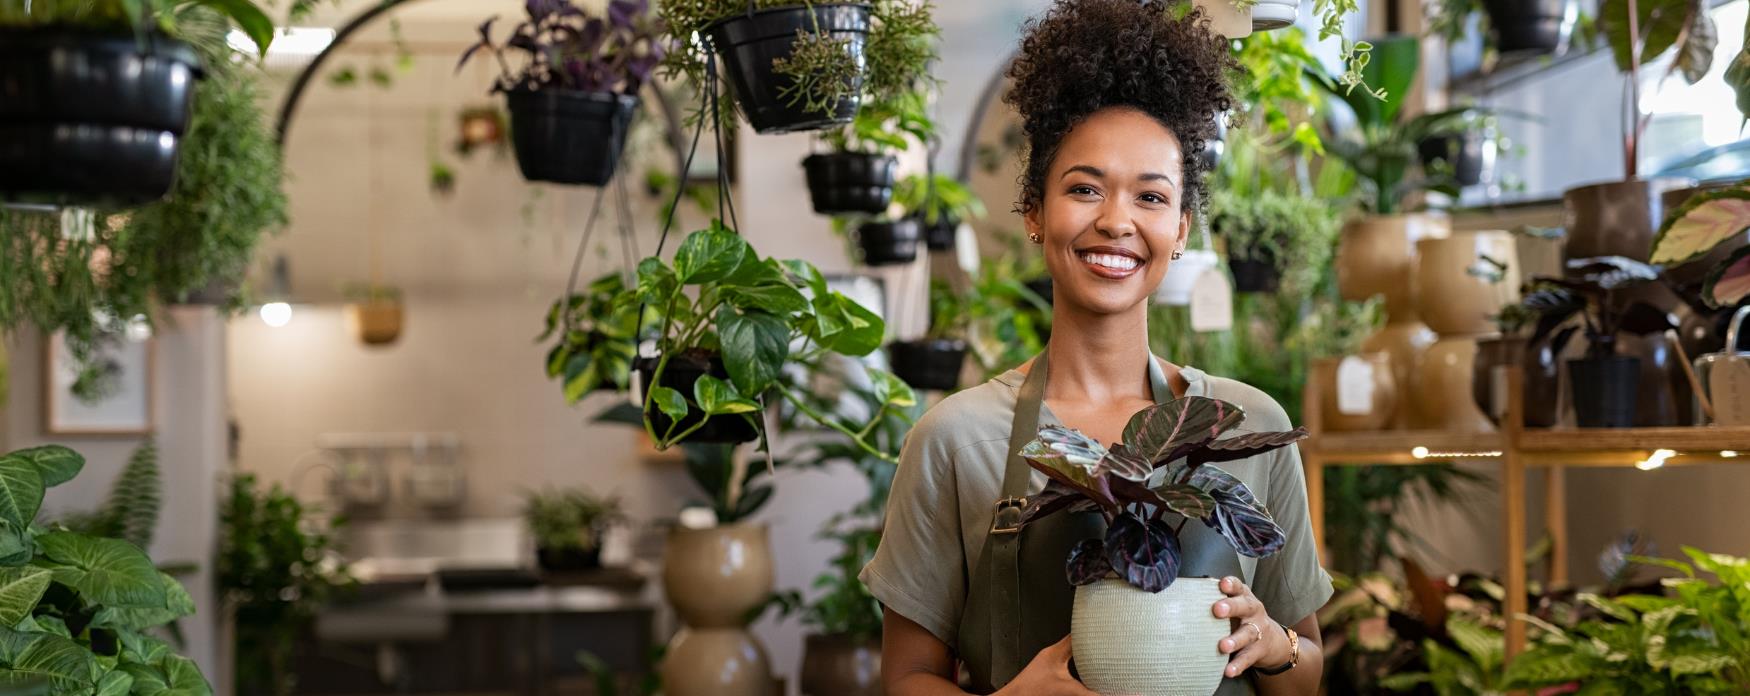 An image of a lady holding a plant